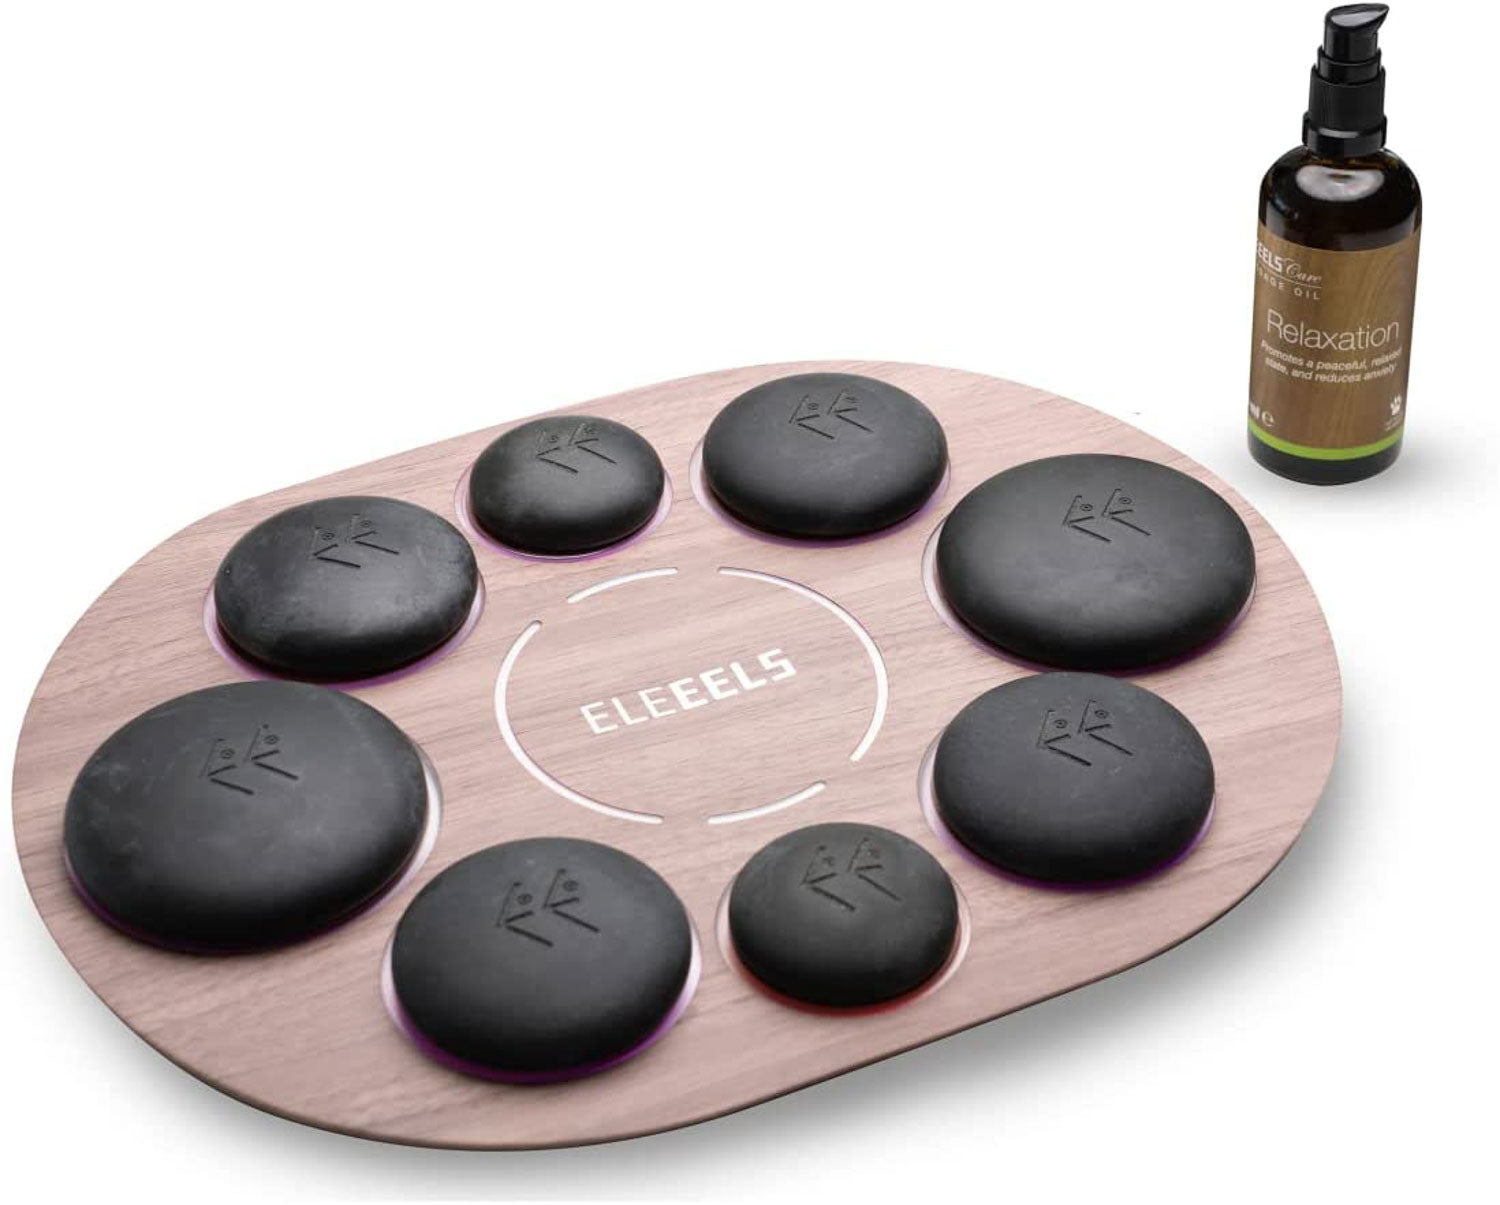 Eleeels S1 Revival Hot Massage Heating Stones Spa Collection Kit A1